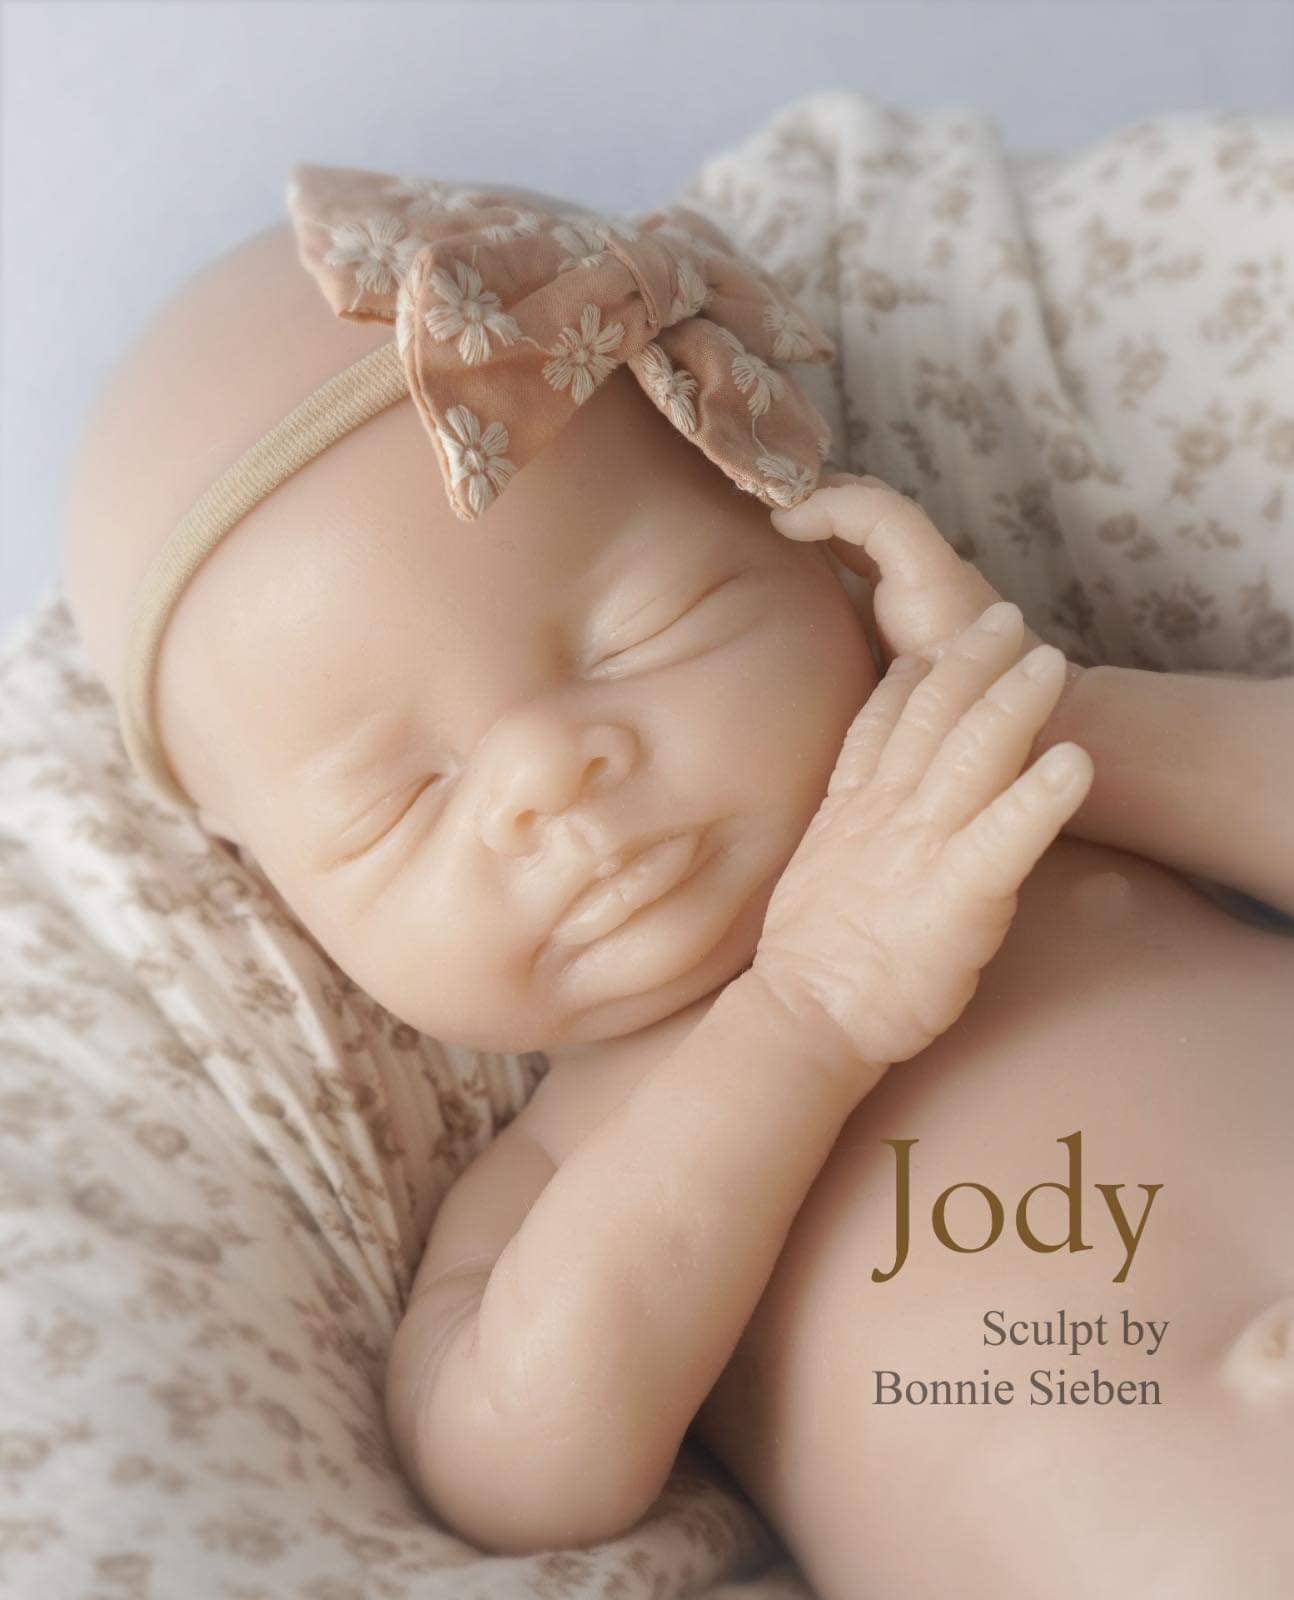 Bonnie *Unpainted Kit* - Full Body Silicone Baby. Limited Edition